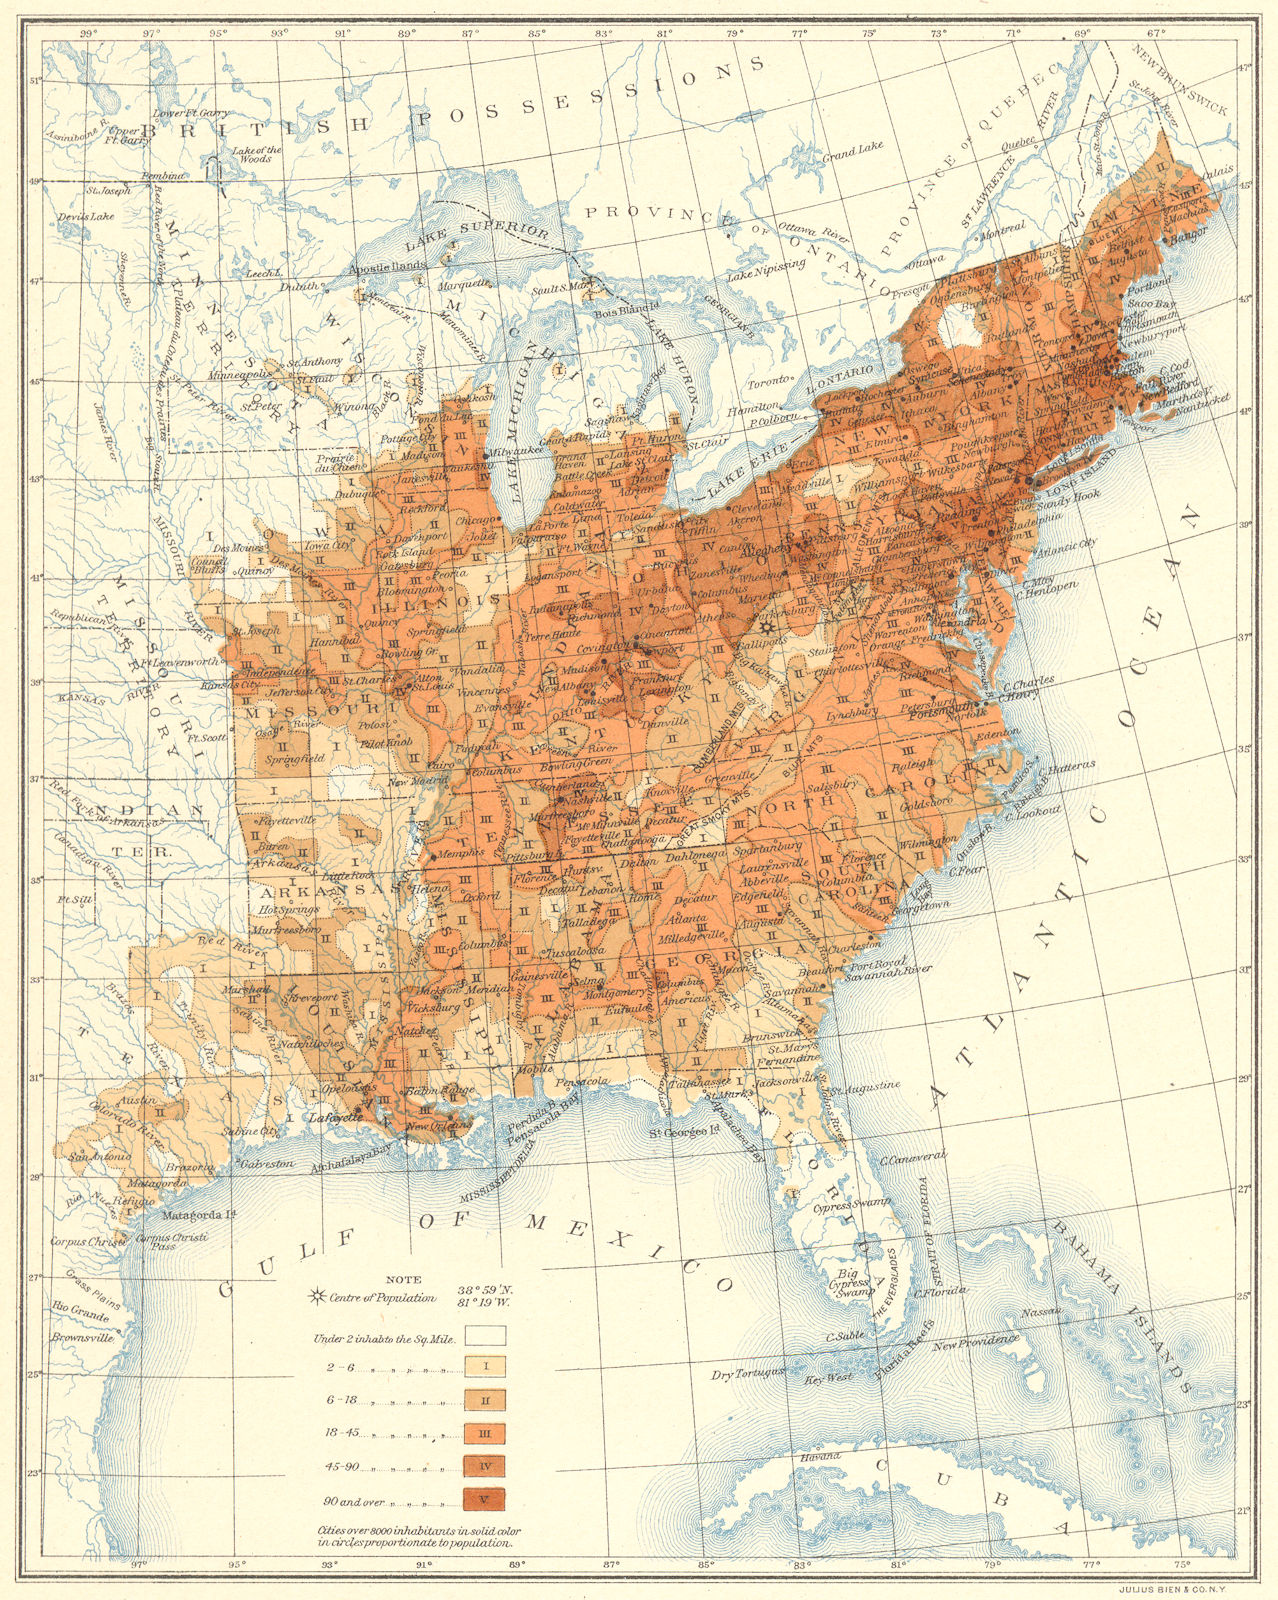 USA. Population distribution East of the 100th Meridian. 1850 1900 old map